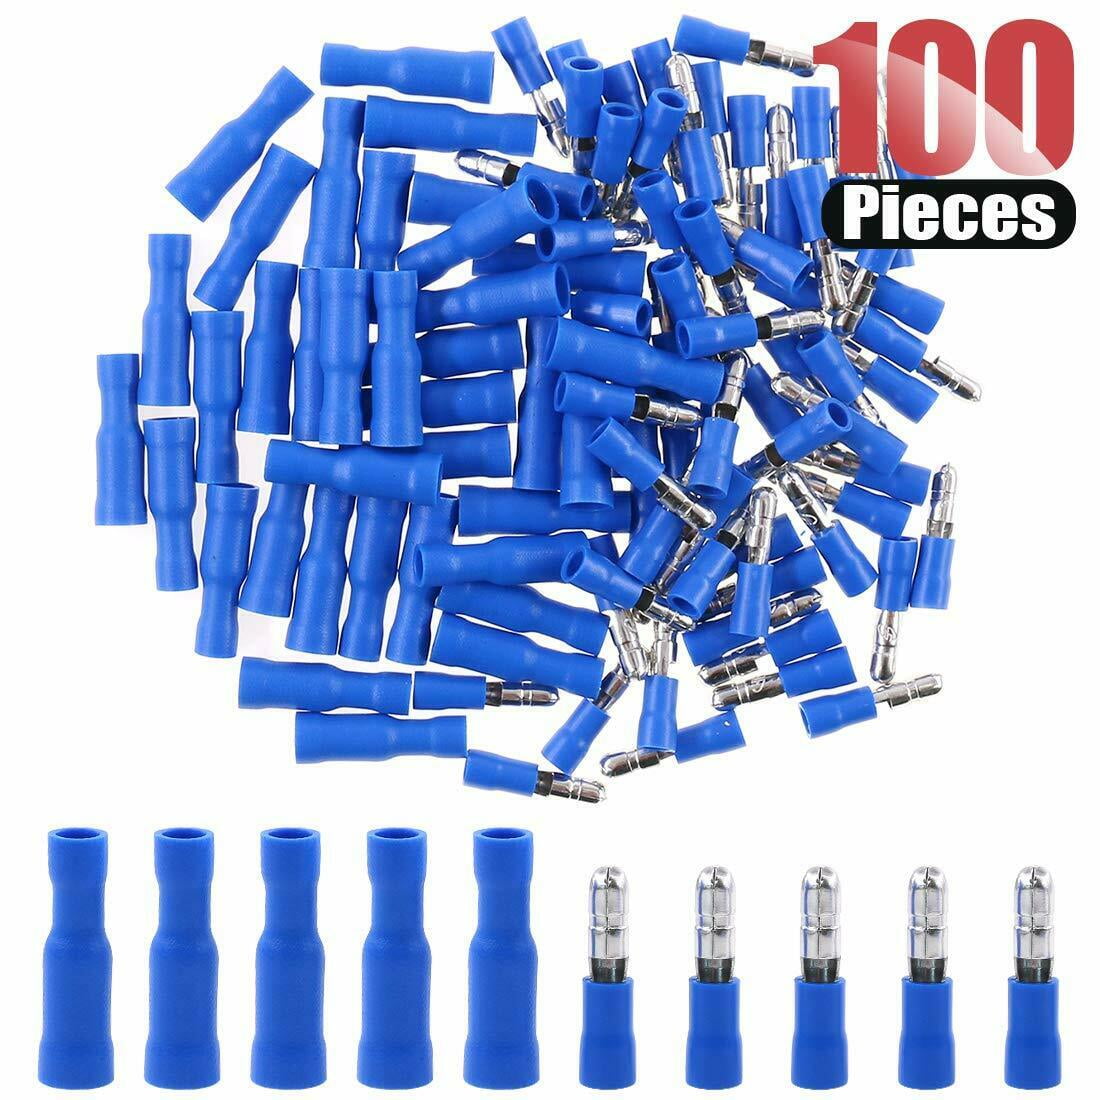 100Pcs BULLET Crimp Terminal Insulated Connectors Male And Female Cable Kit Blue 